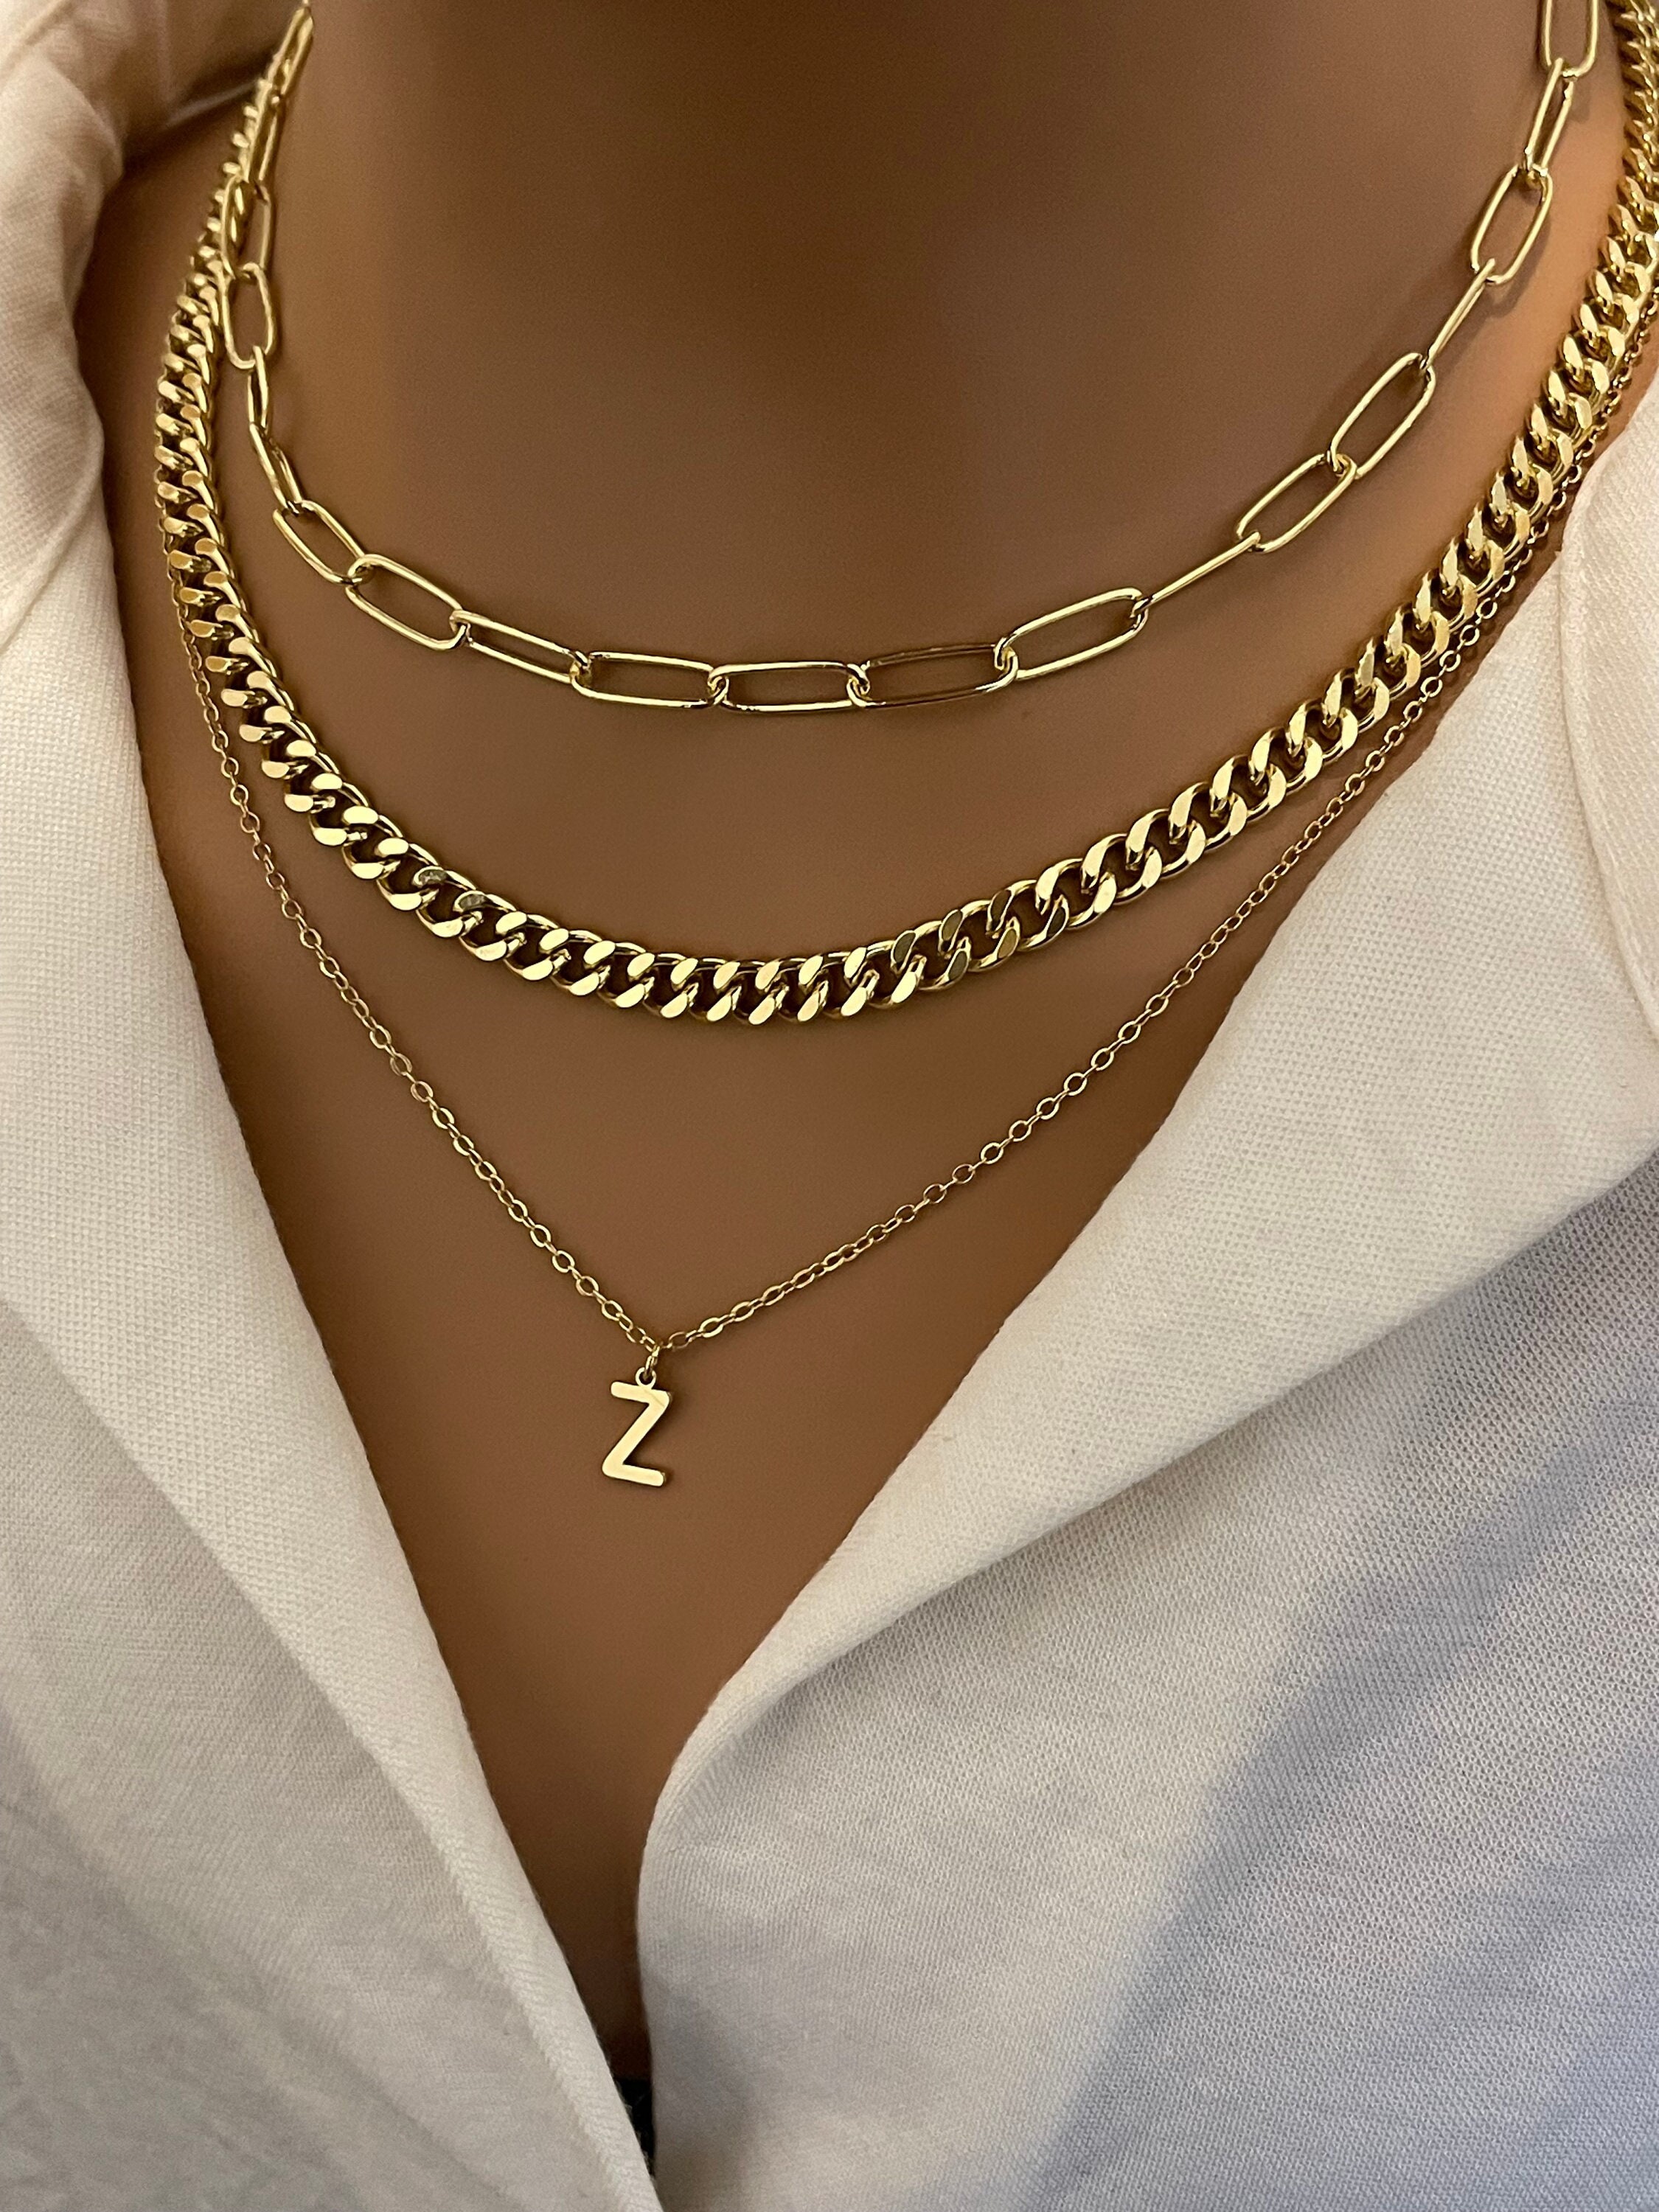 14k Solid Gold Layered Necklace Clasp Multi Necklace Separator Detangler  Layering Clasp Untangle Layered Necklaces Detangler 